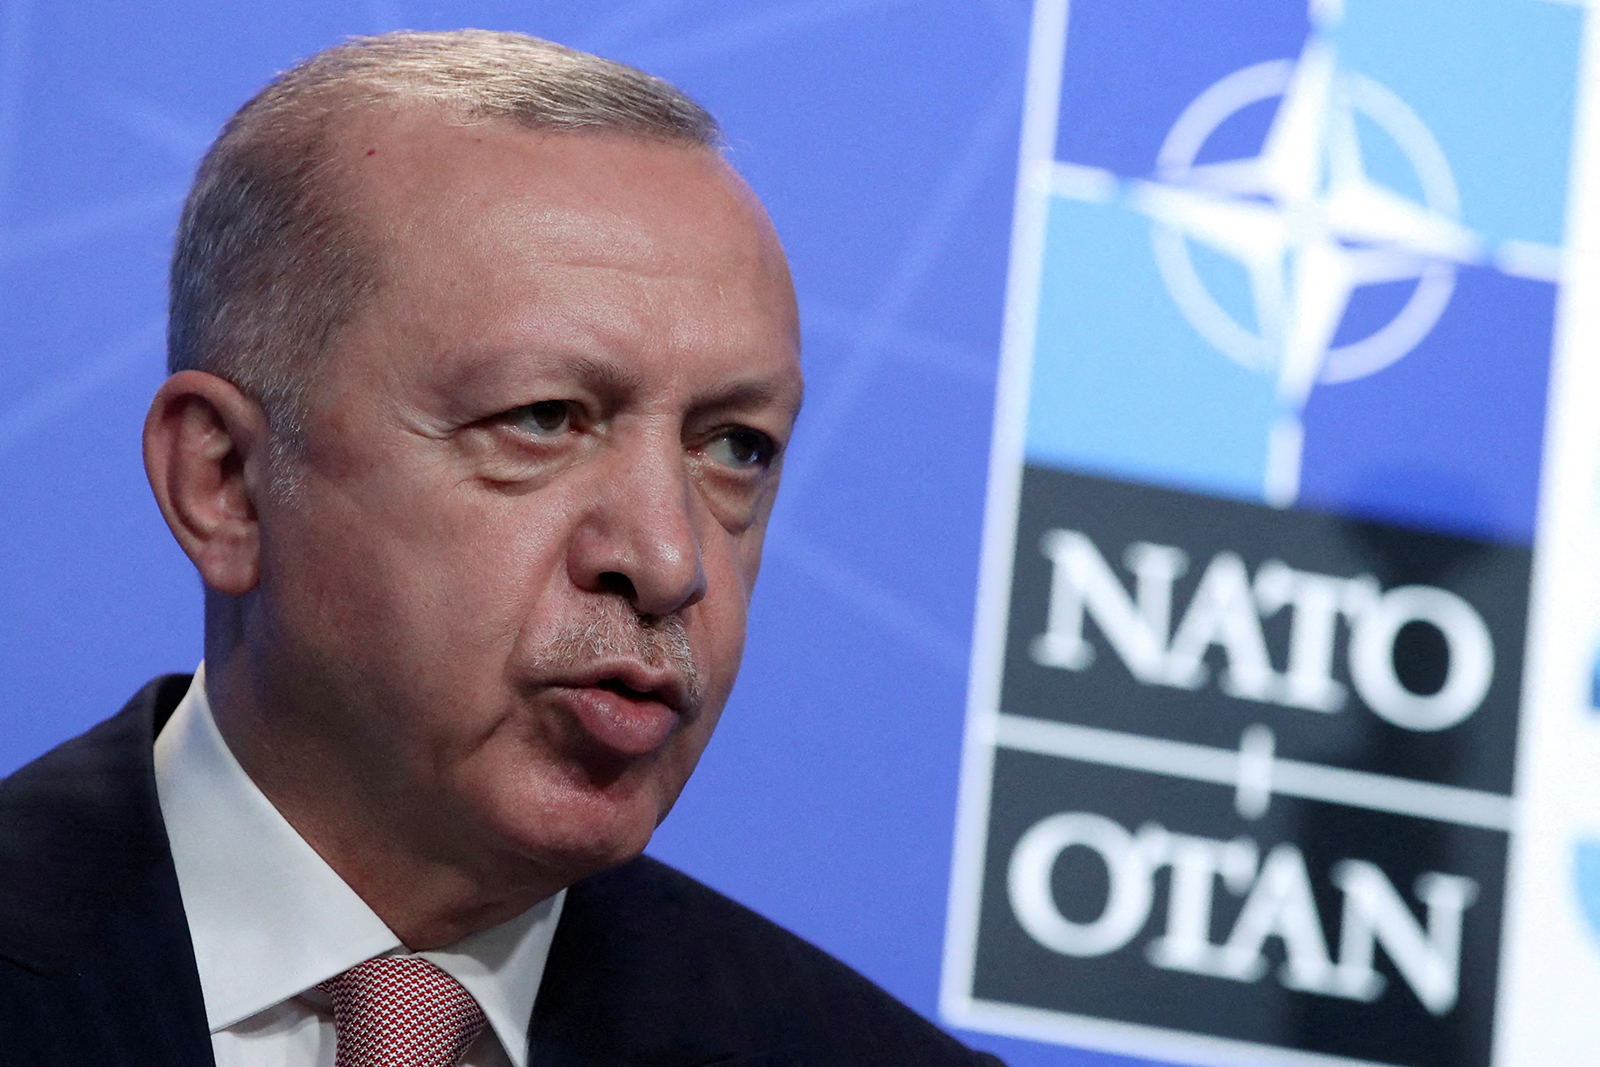 Turkish President Tayyip Erdogan holds a news conference during the NATO summit at the Alliance's headquarters in Brussels, Belgium on June 14, 2021. 